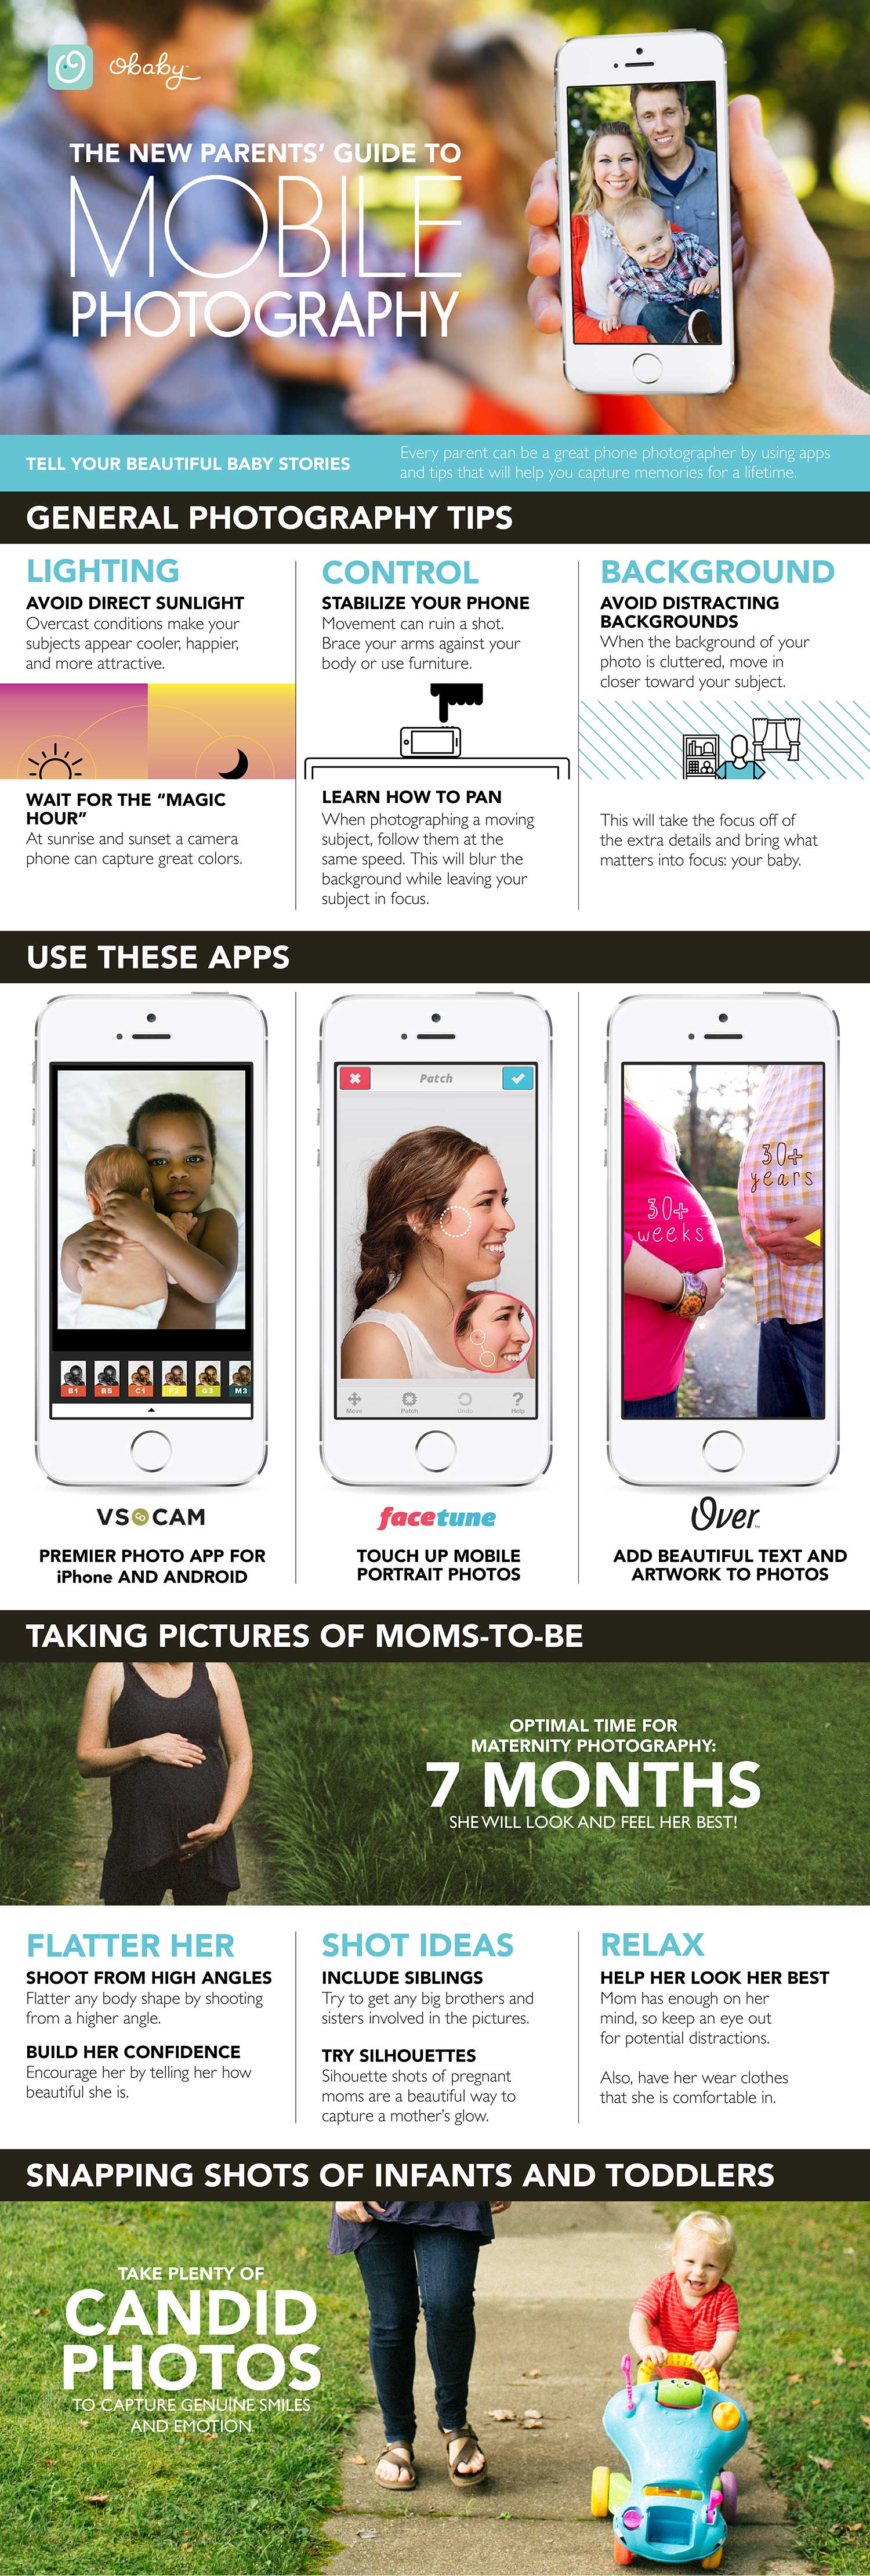 The New Parents' Guide to Mobile Photography